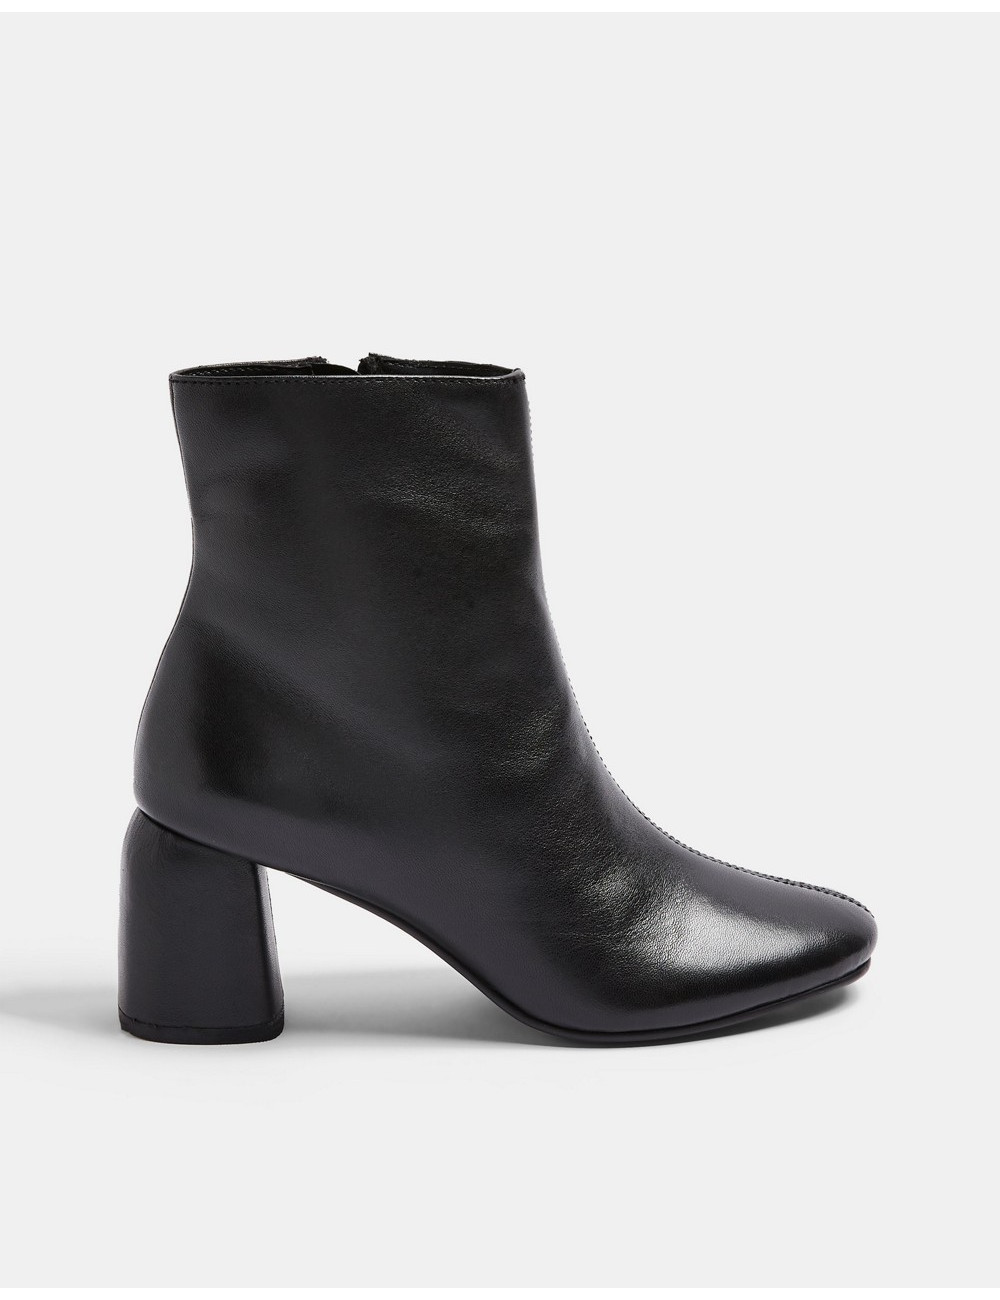 Topshop leather heeled...